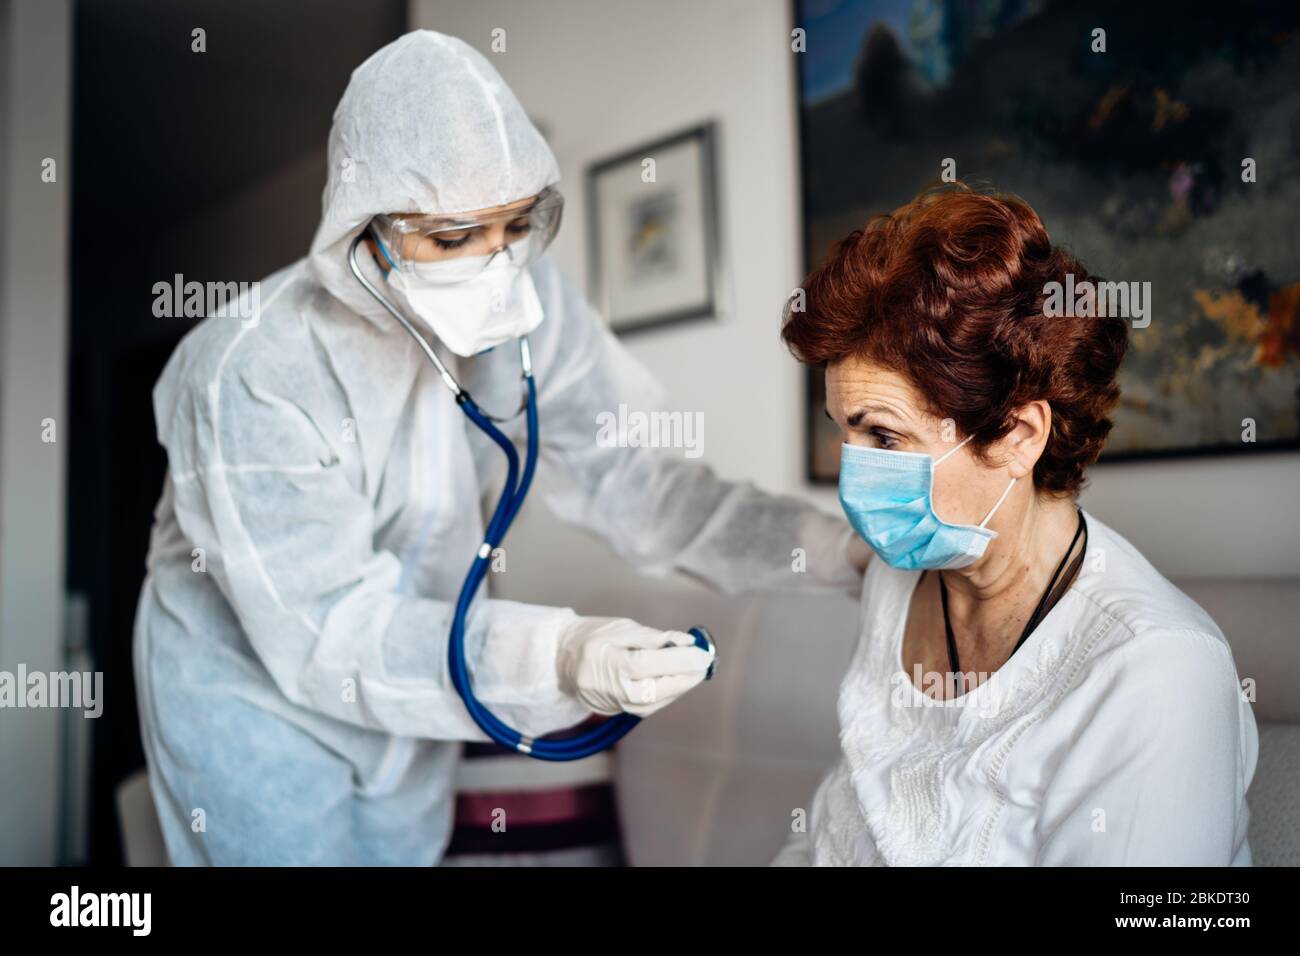 Home care doctor/nurse listening to the senior patients’ lungs with a stethoscope.COVID-19 patient self isolation examination.Coronavirus frontline me Stock Photo